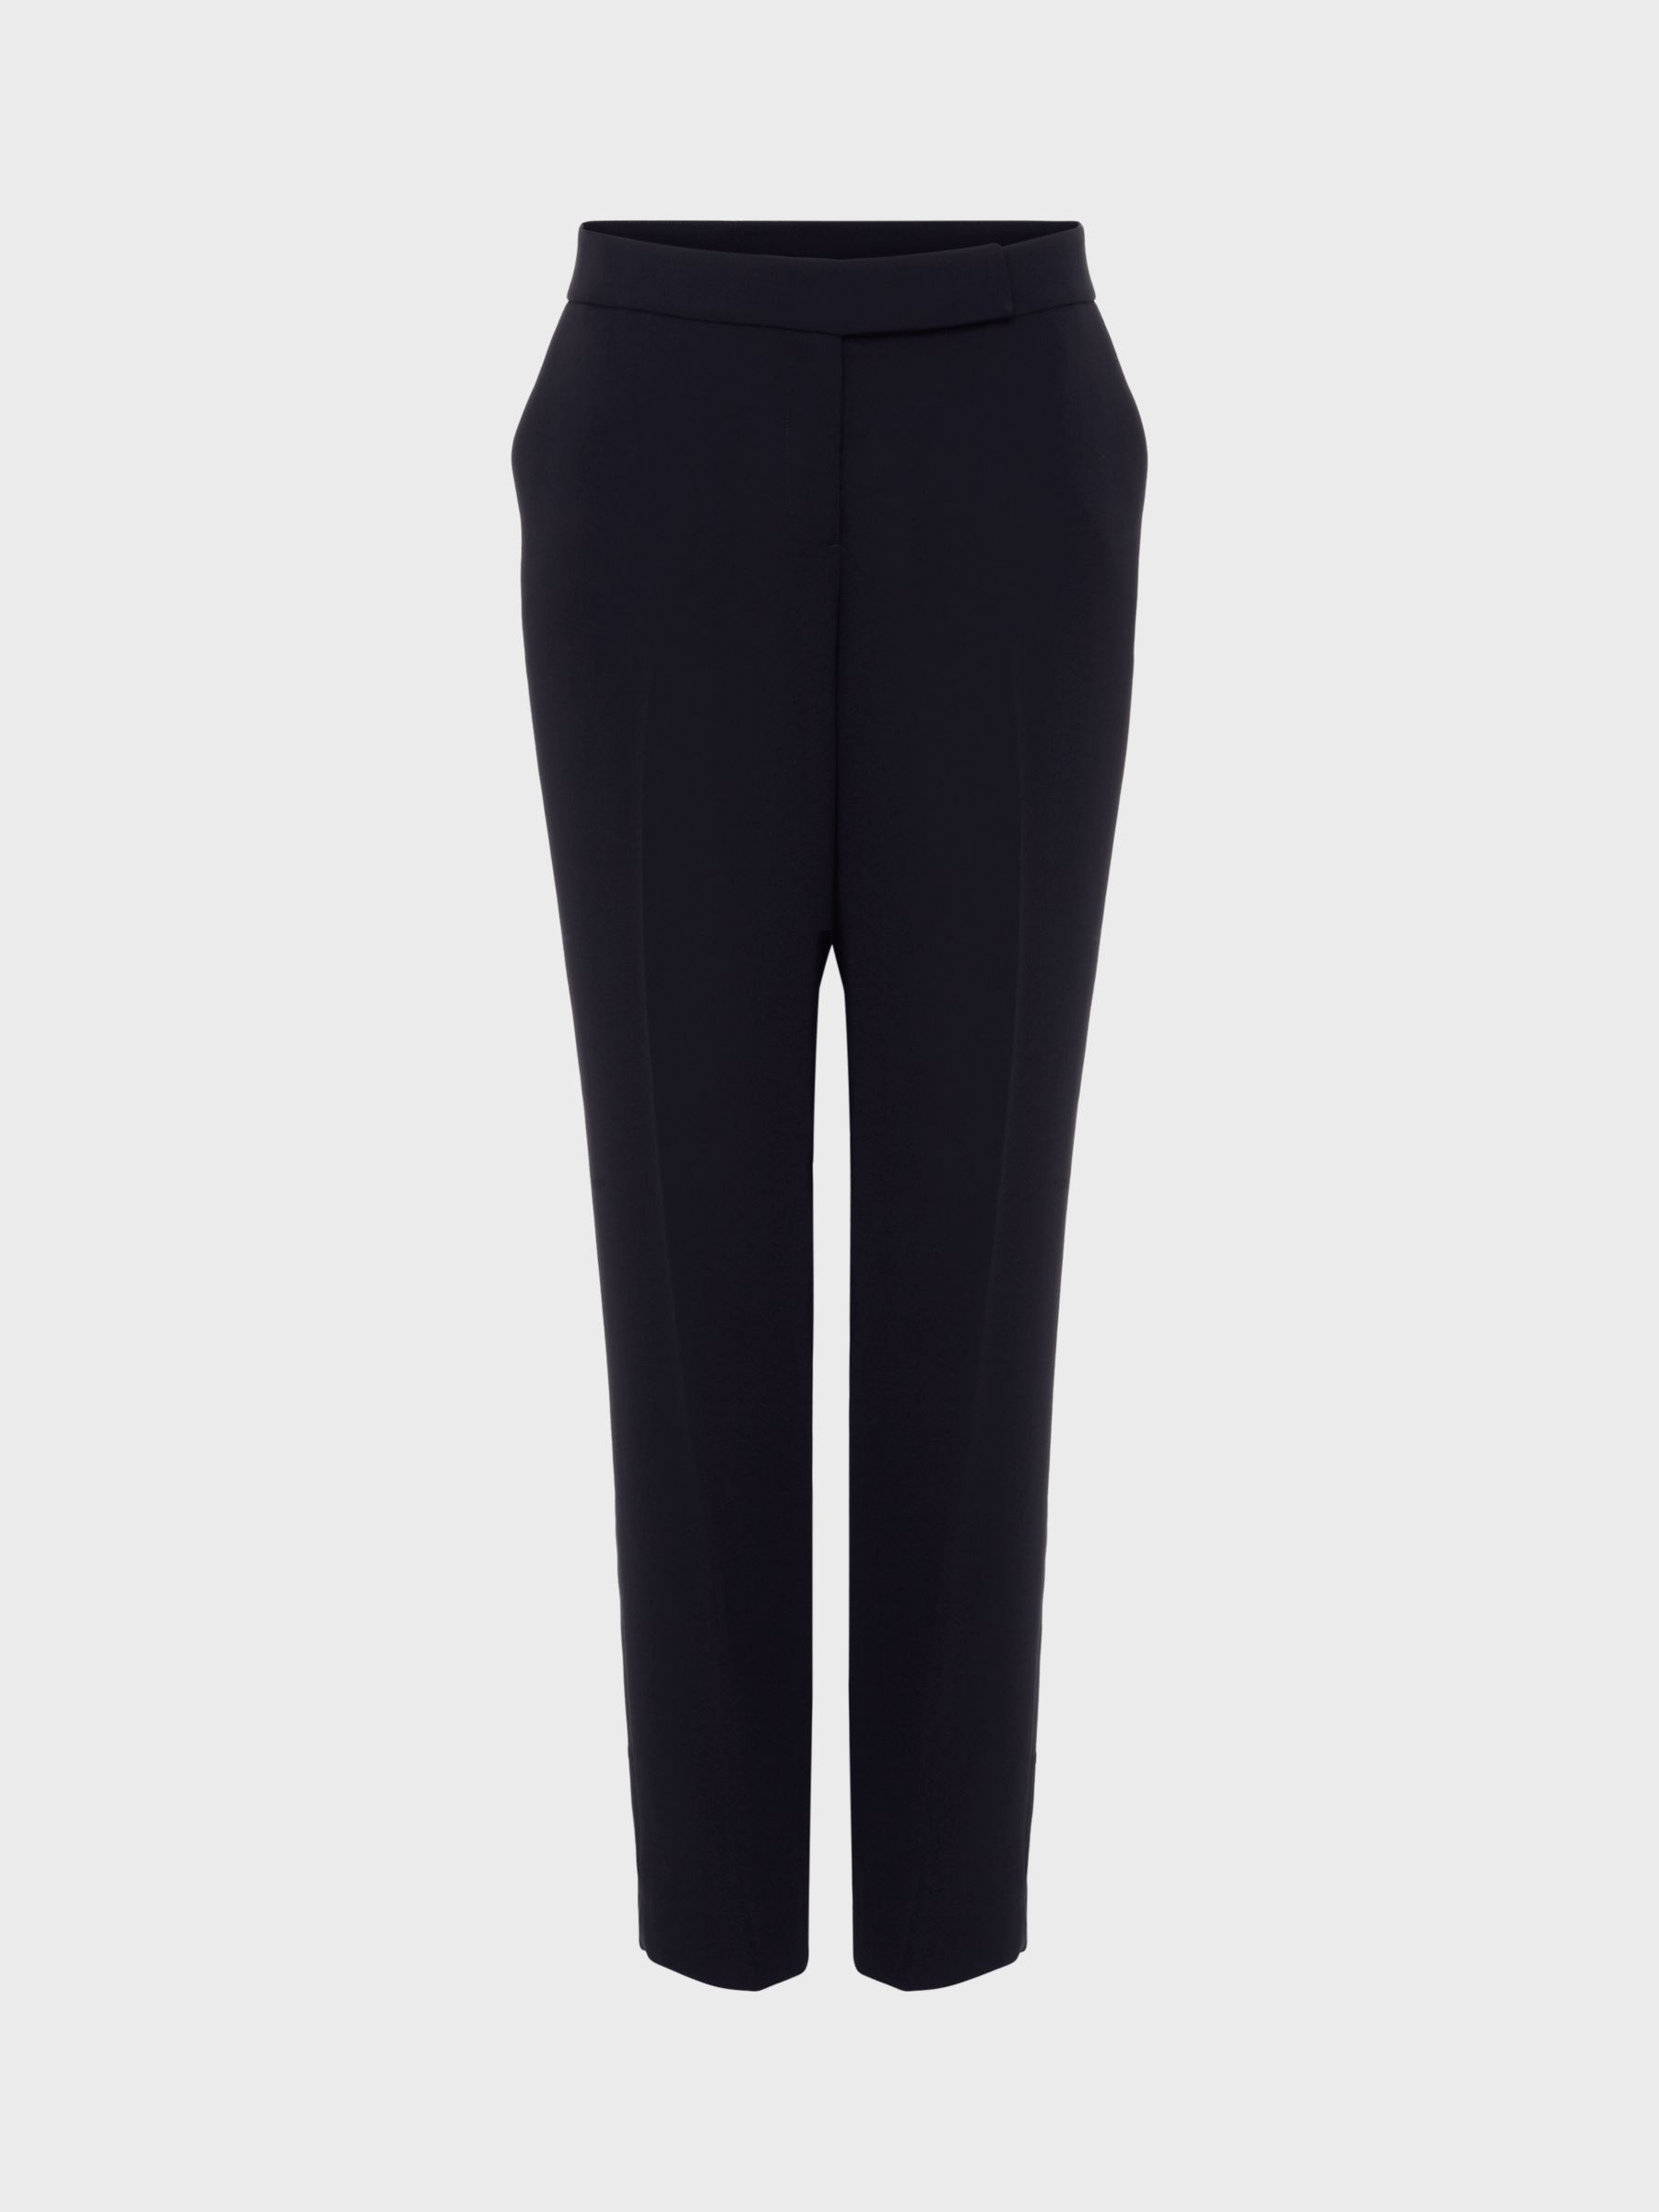 Hobbs Stevie Plain Tailored Tapered Trousers, Navy at John Lewis & Partners